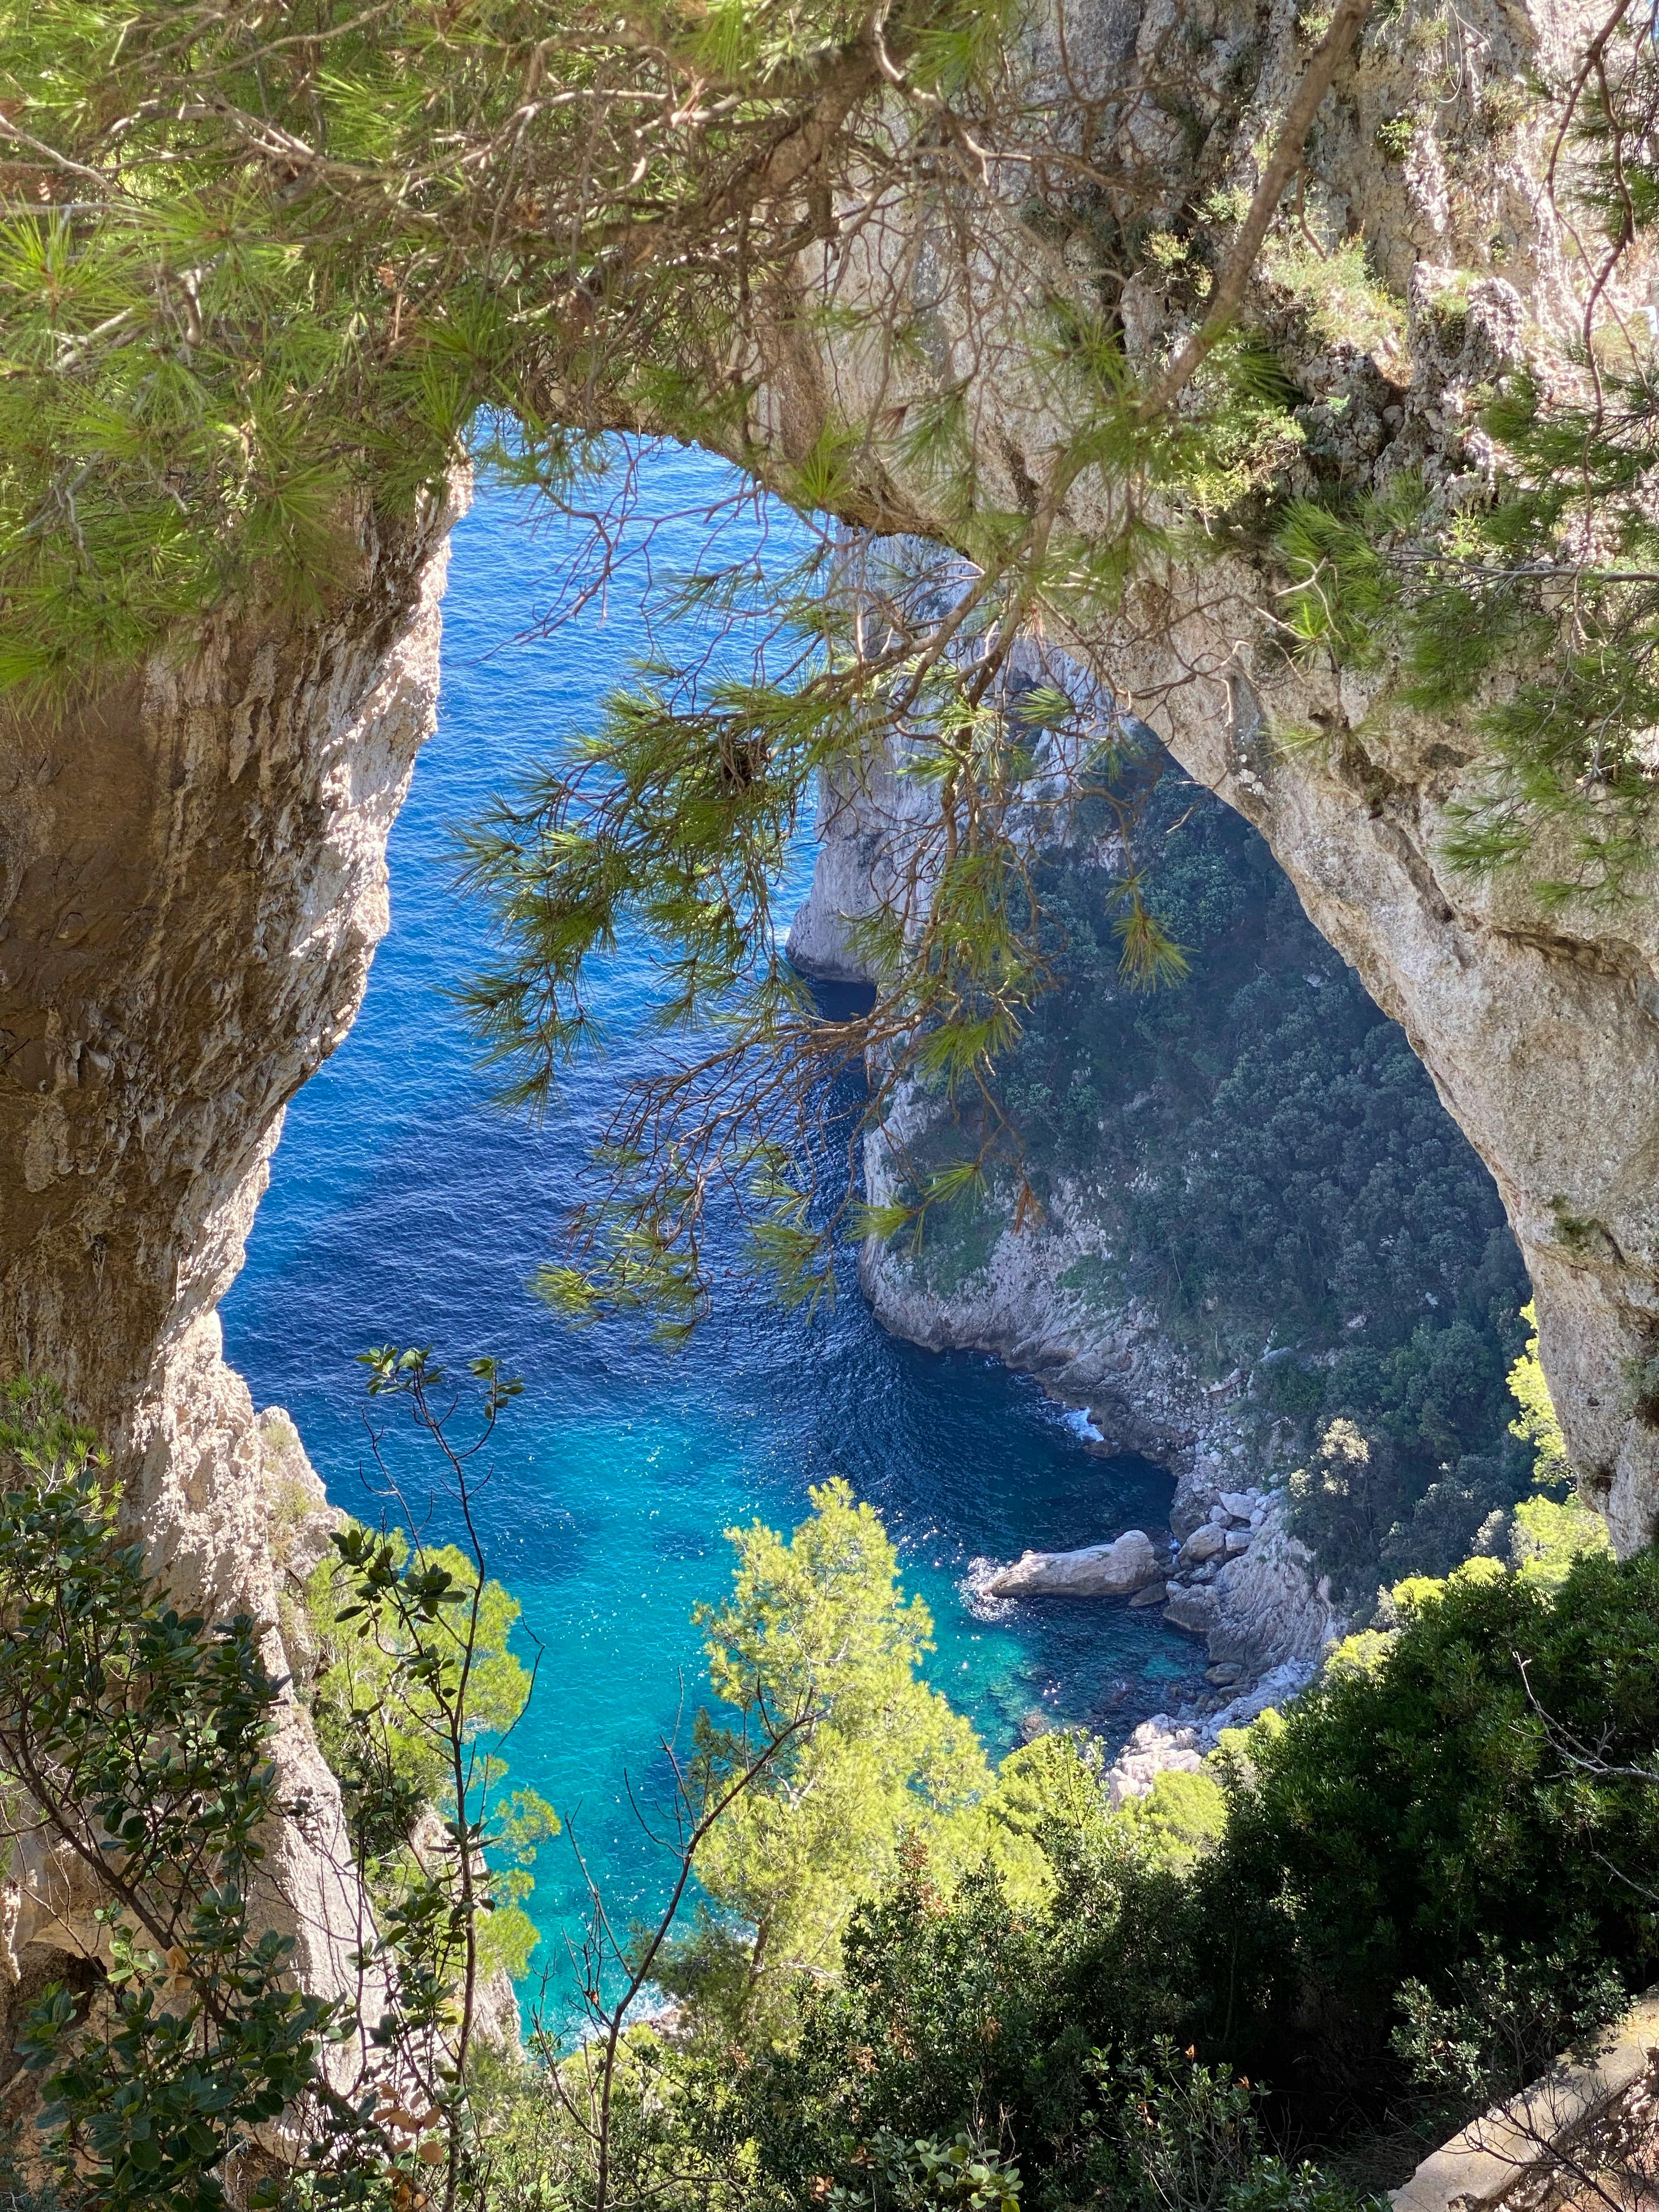 Arco Naturale is Natural Arch on Coast of Island of Capri, Italy